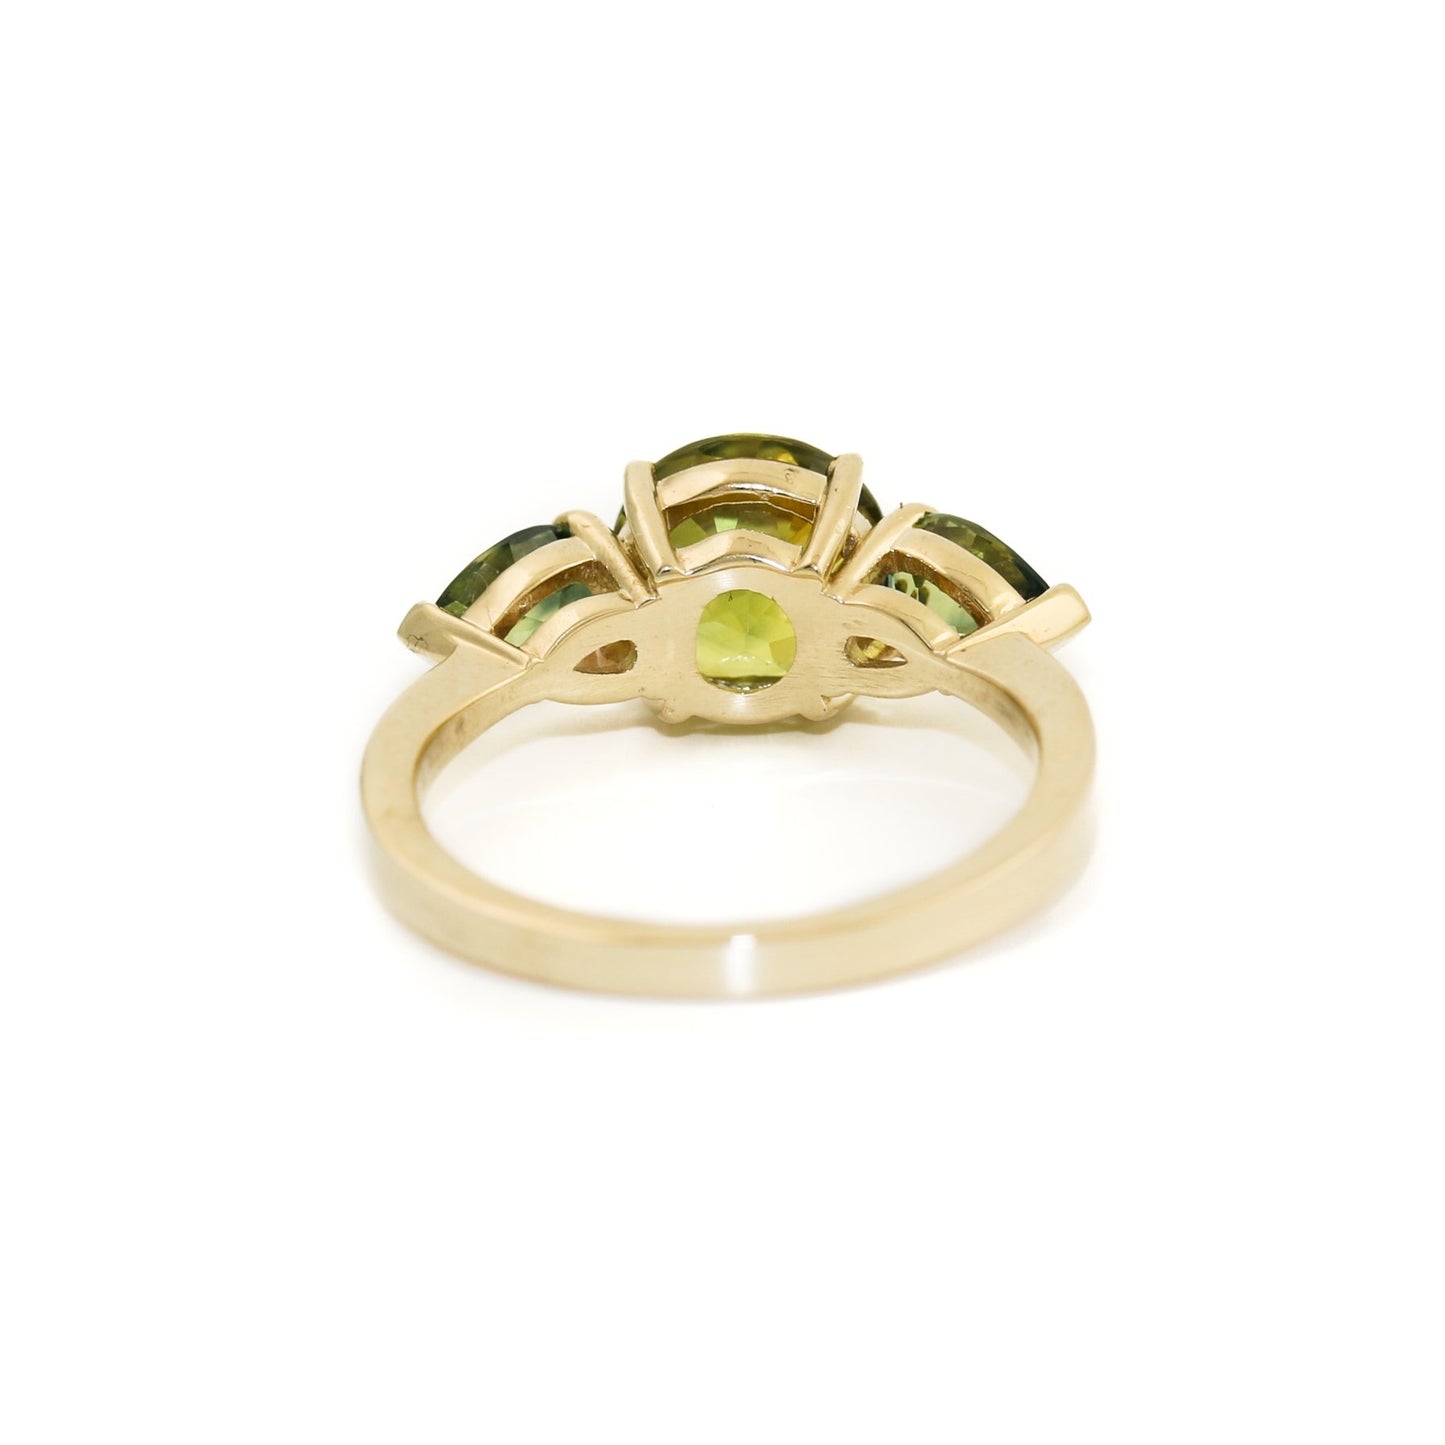 Chartreuse Sapphire Engagement Ring by Kingdom - Kingdom Jewelry